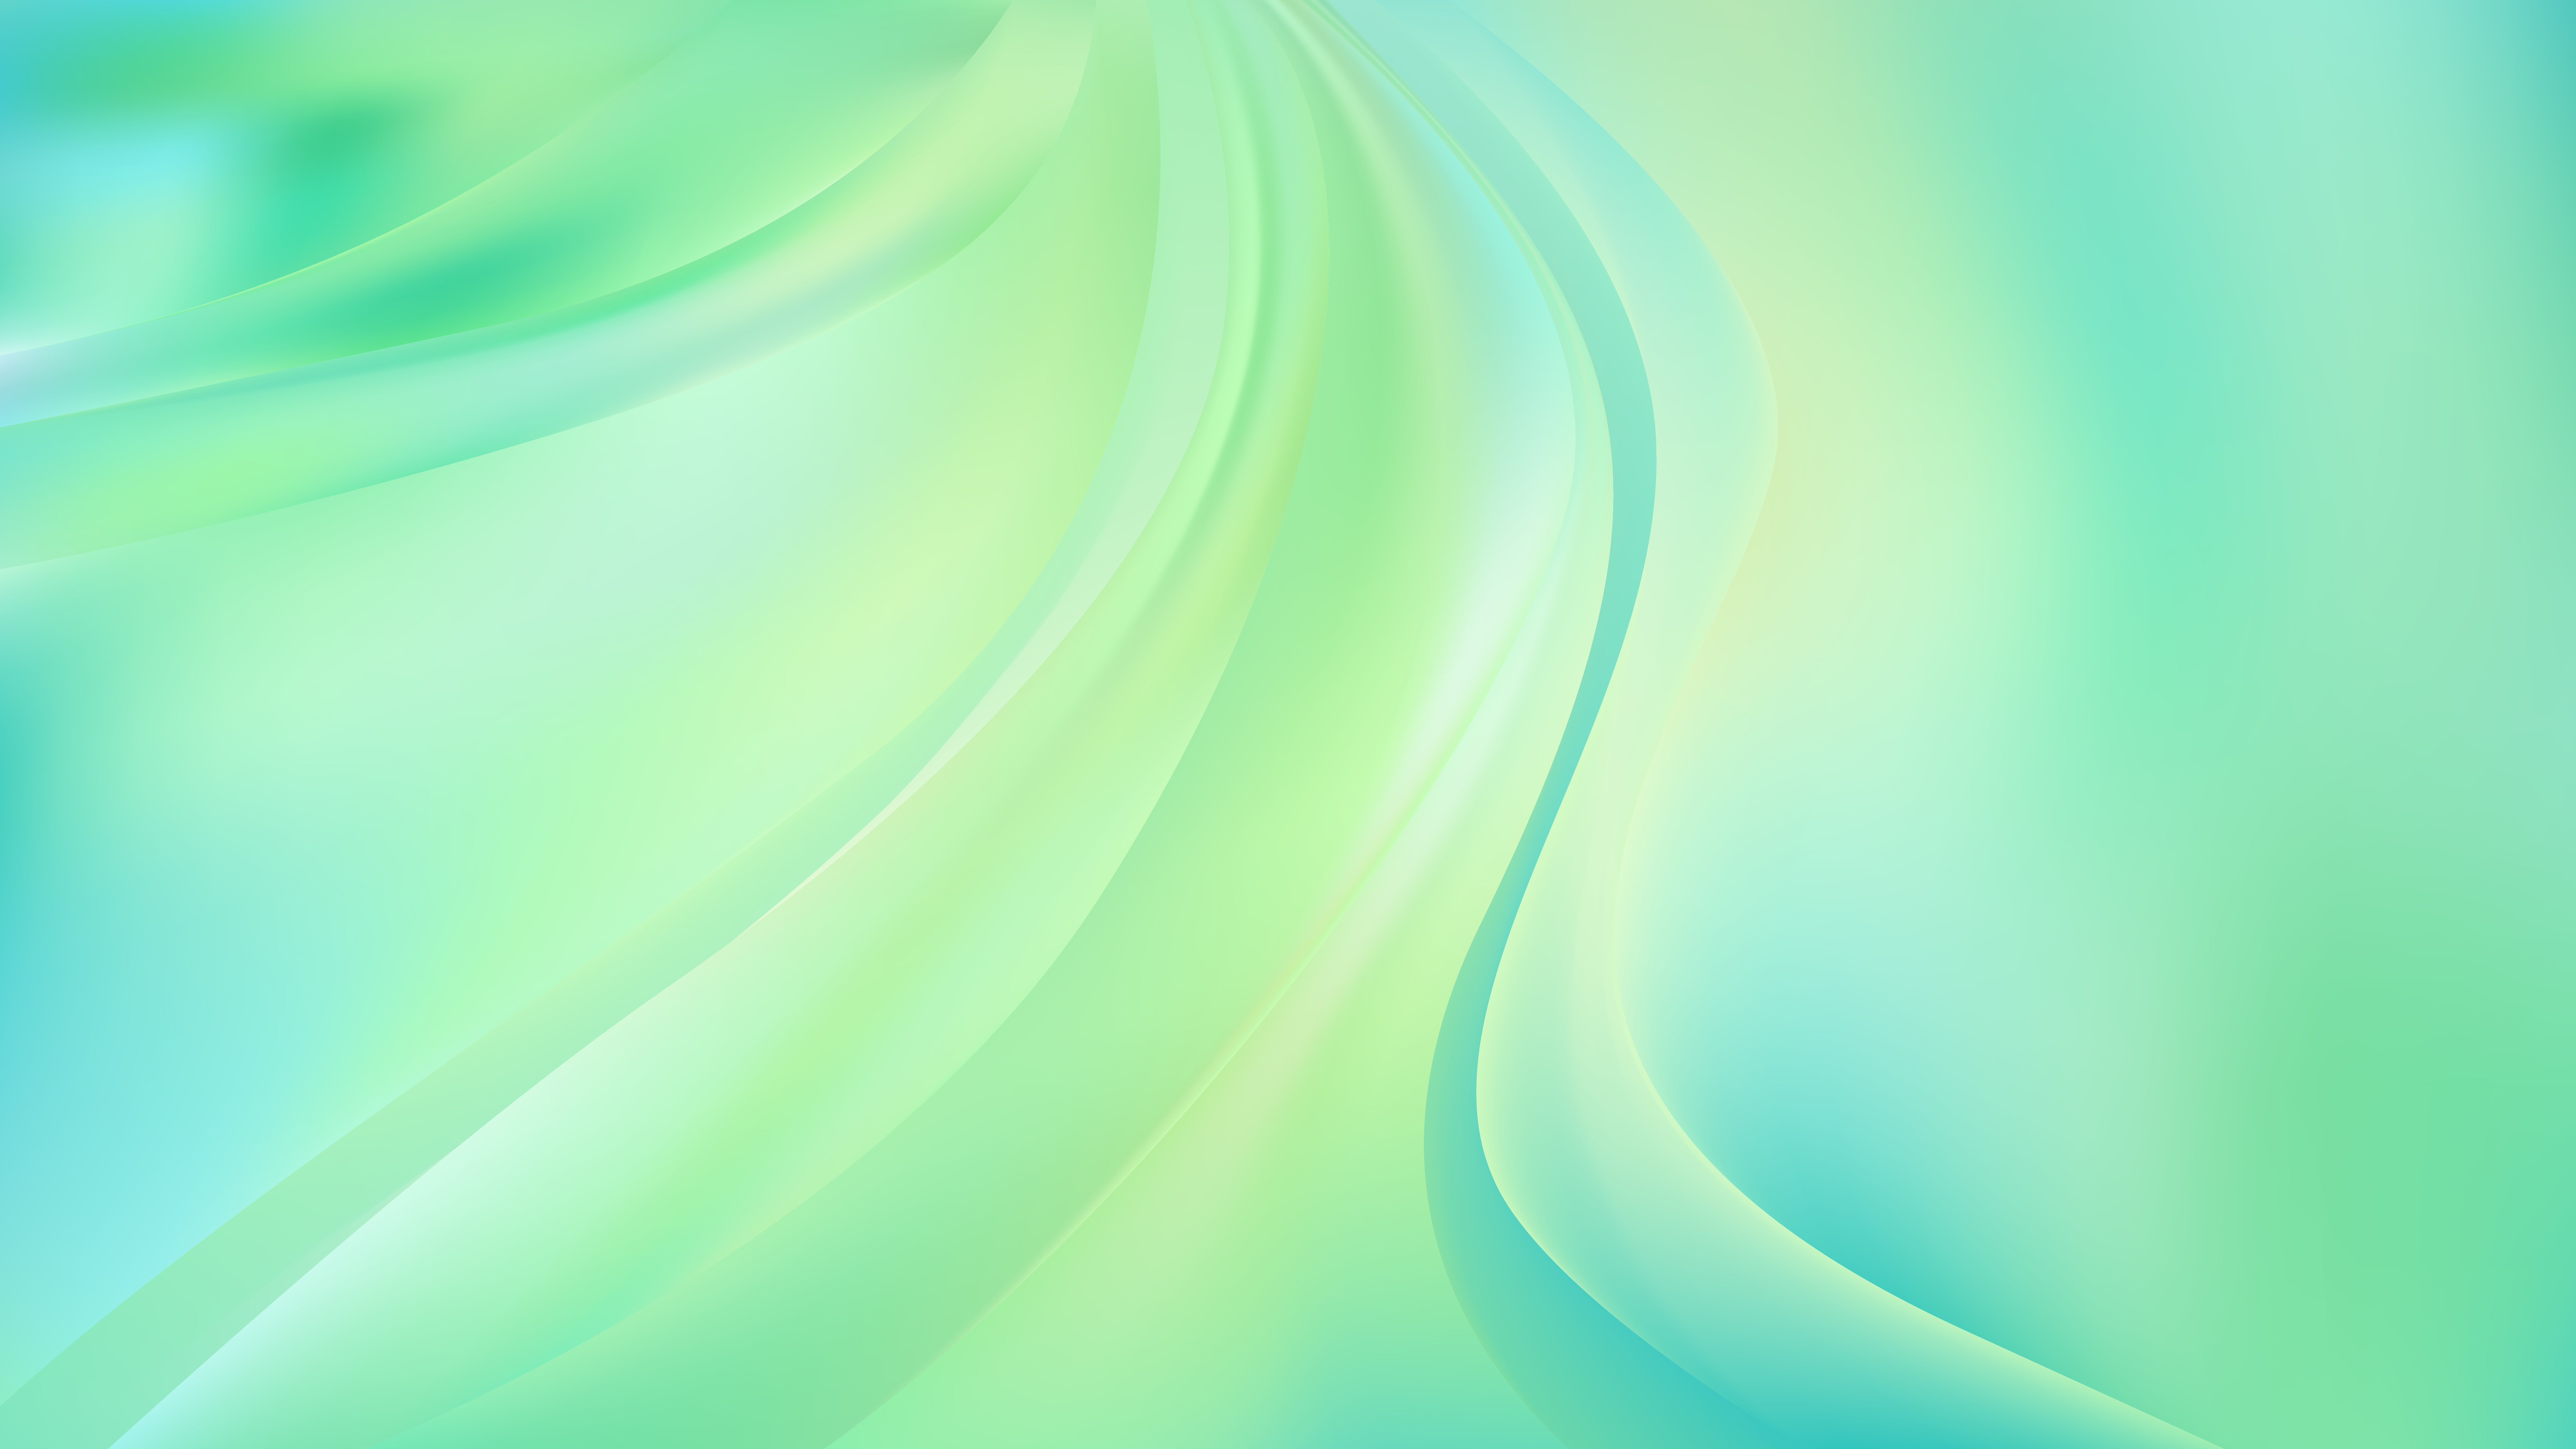 Abstract Glowing Mint Green Wave Background - Mint Green Abstract Background - HD Wallpaper 